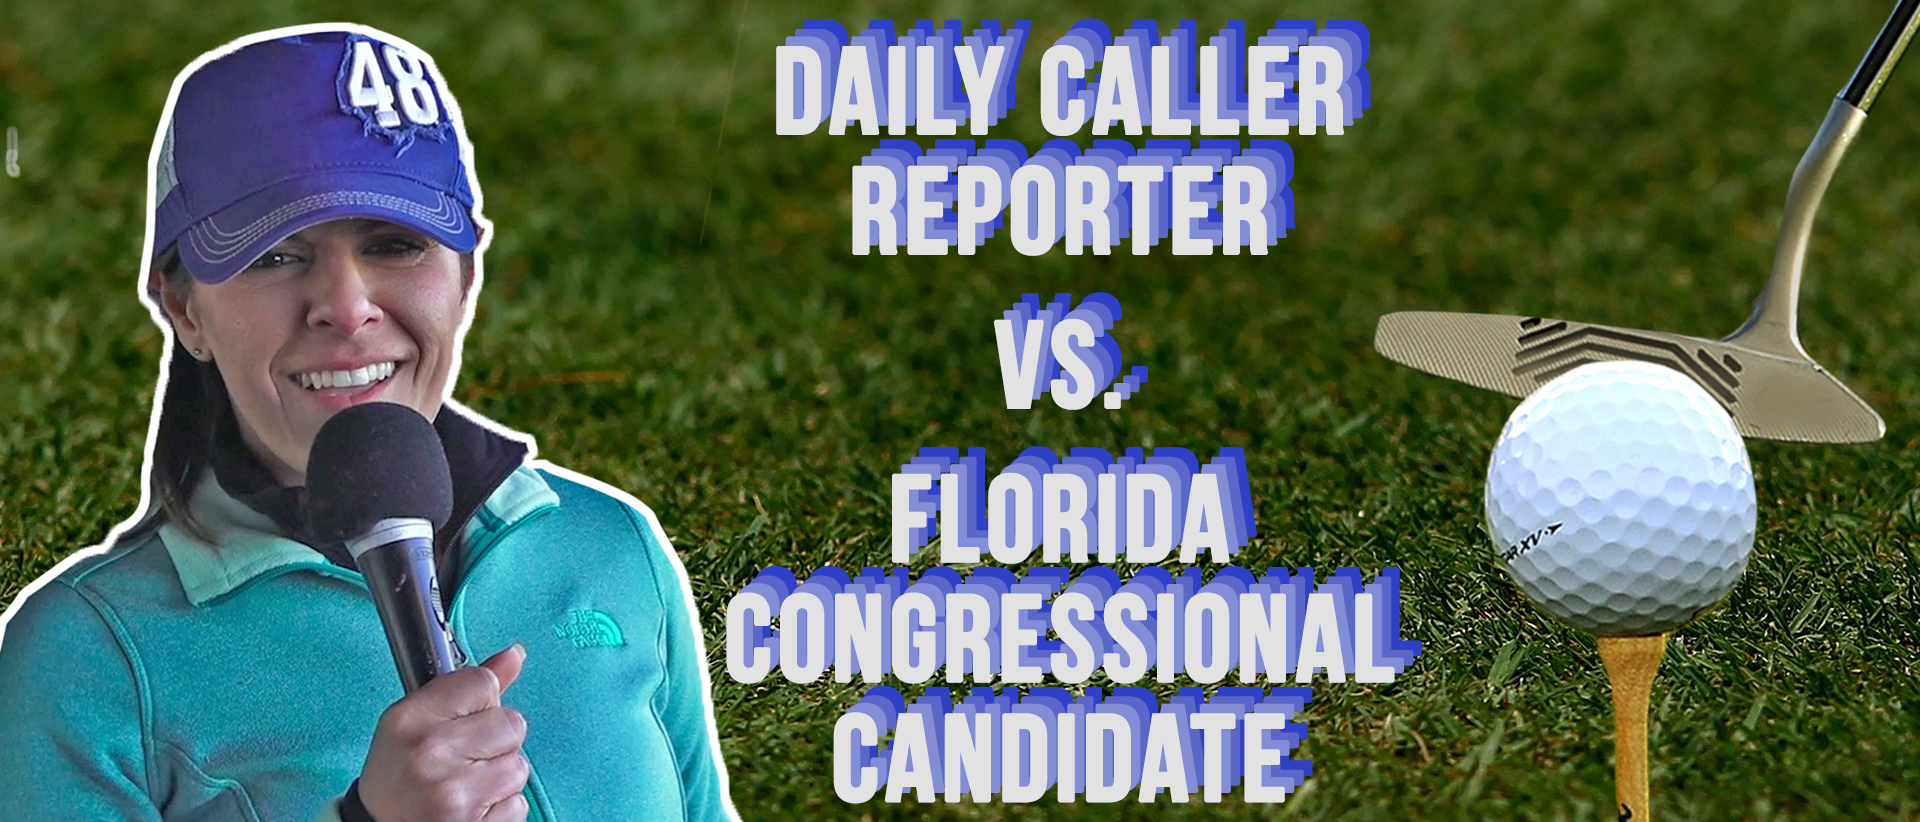 Daily Caller Reporter VS. Florida Congressional Candidate | The Daily Caller